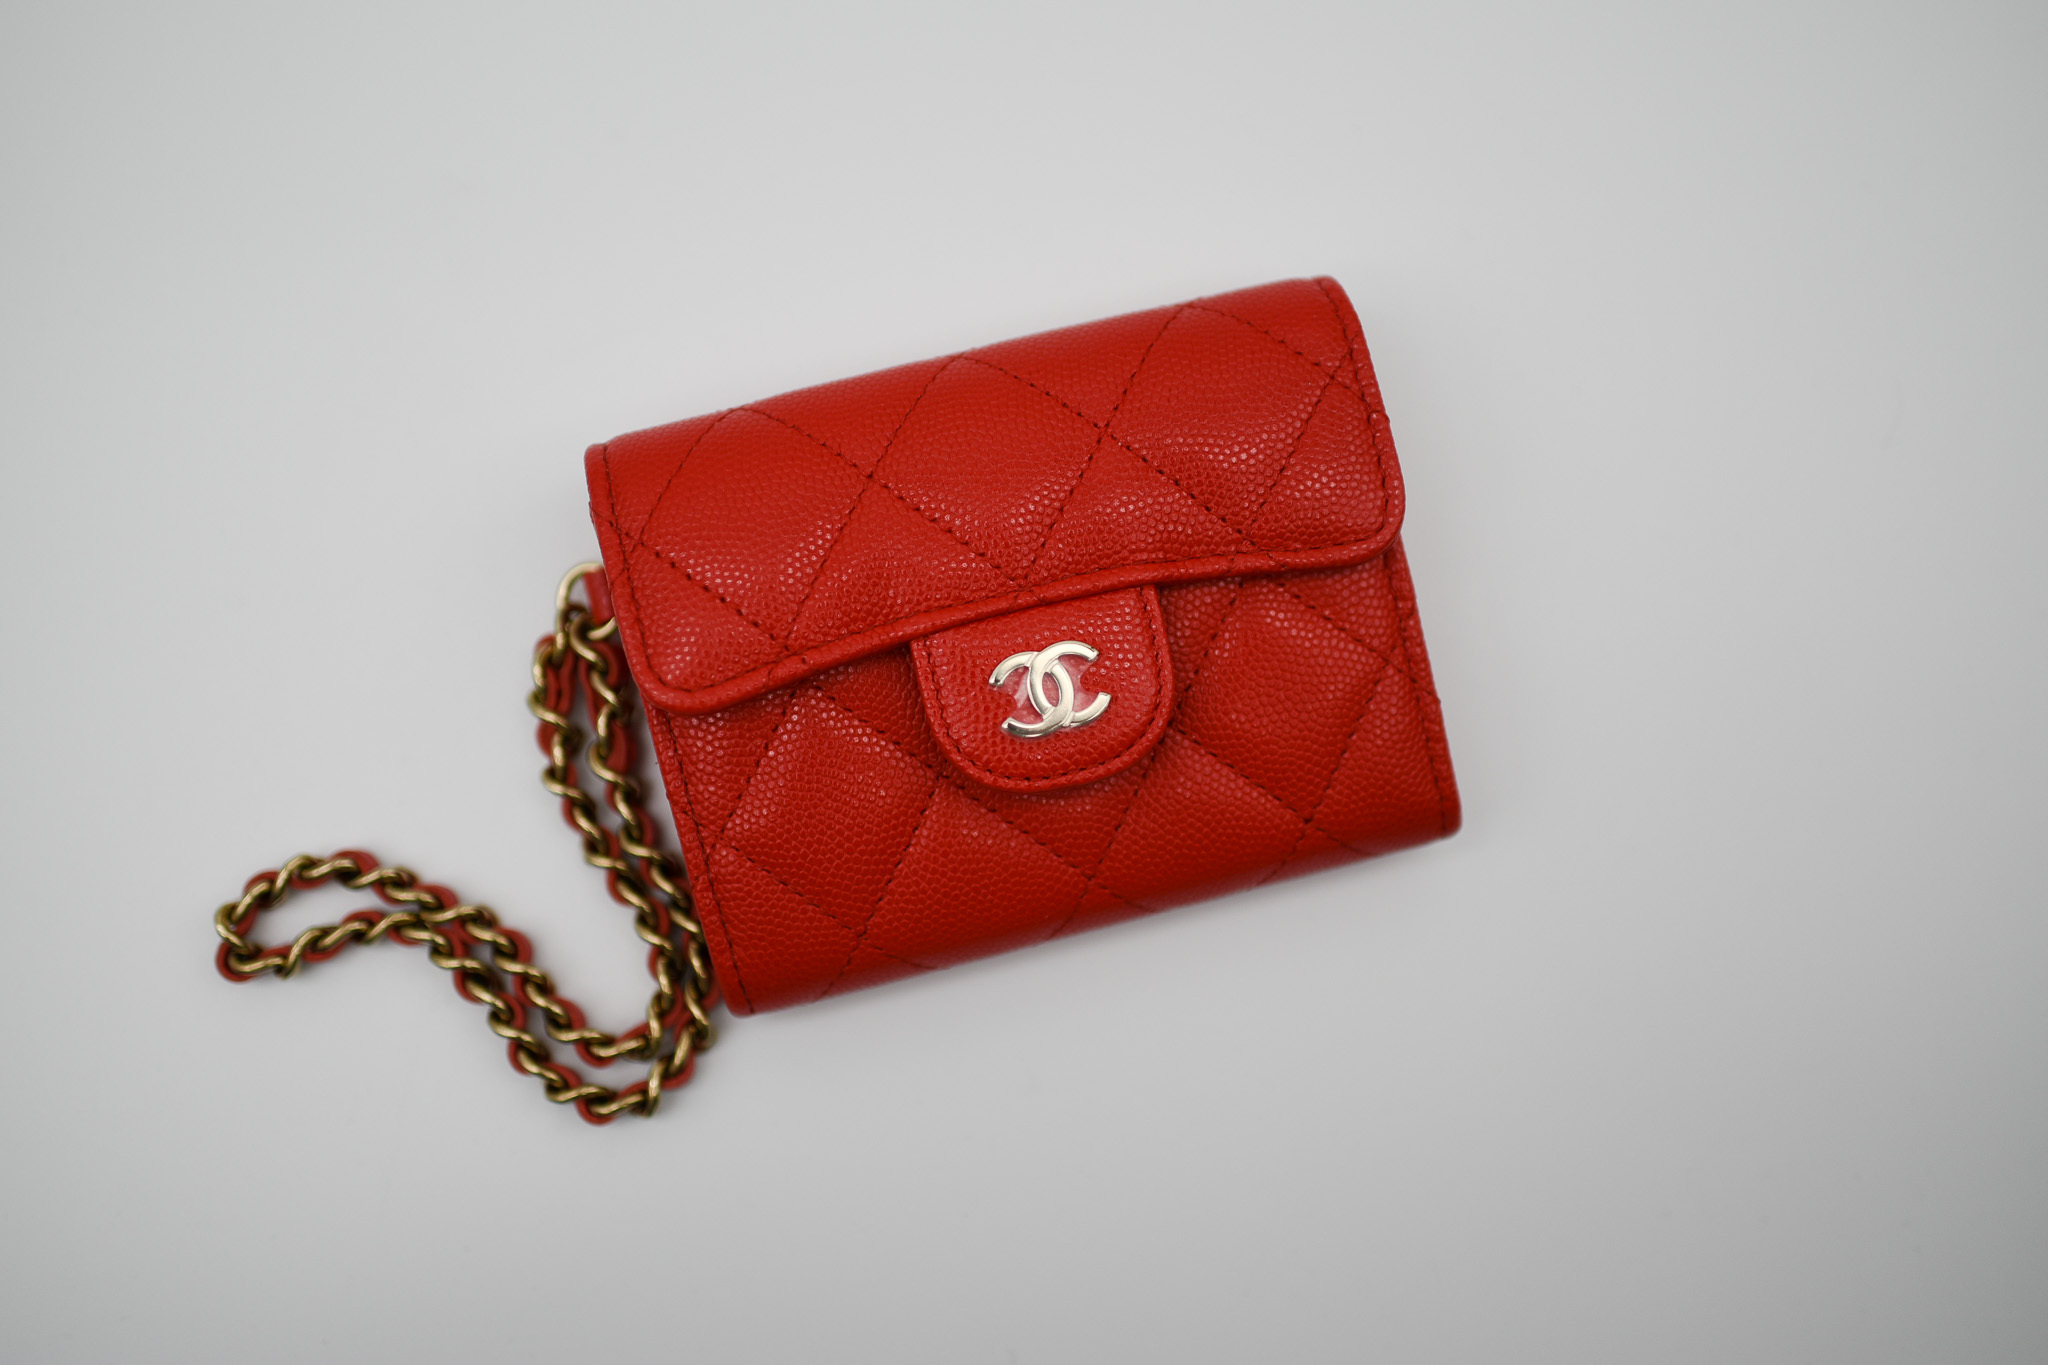 Chanel Wristlet Card Holder, Red Caviar with Gold Hardware, New in Box GA001